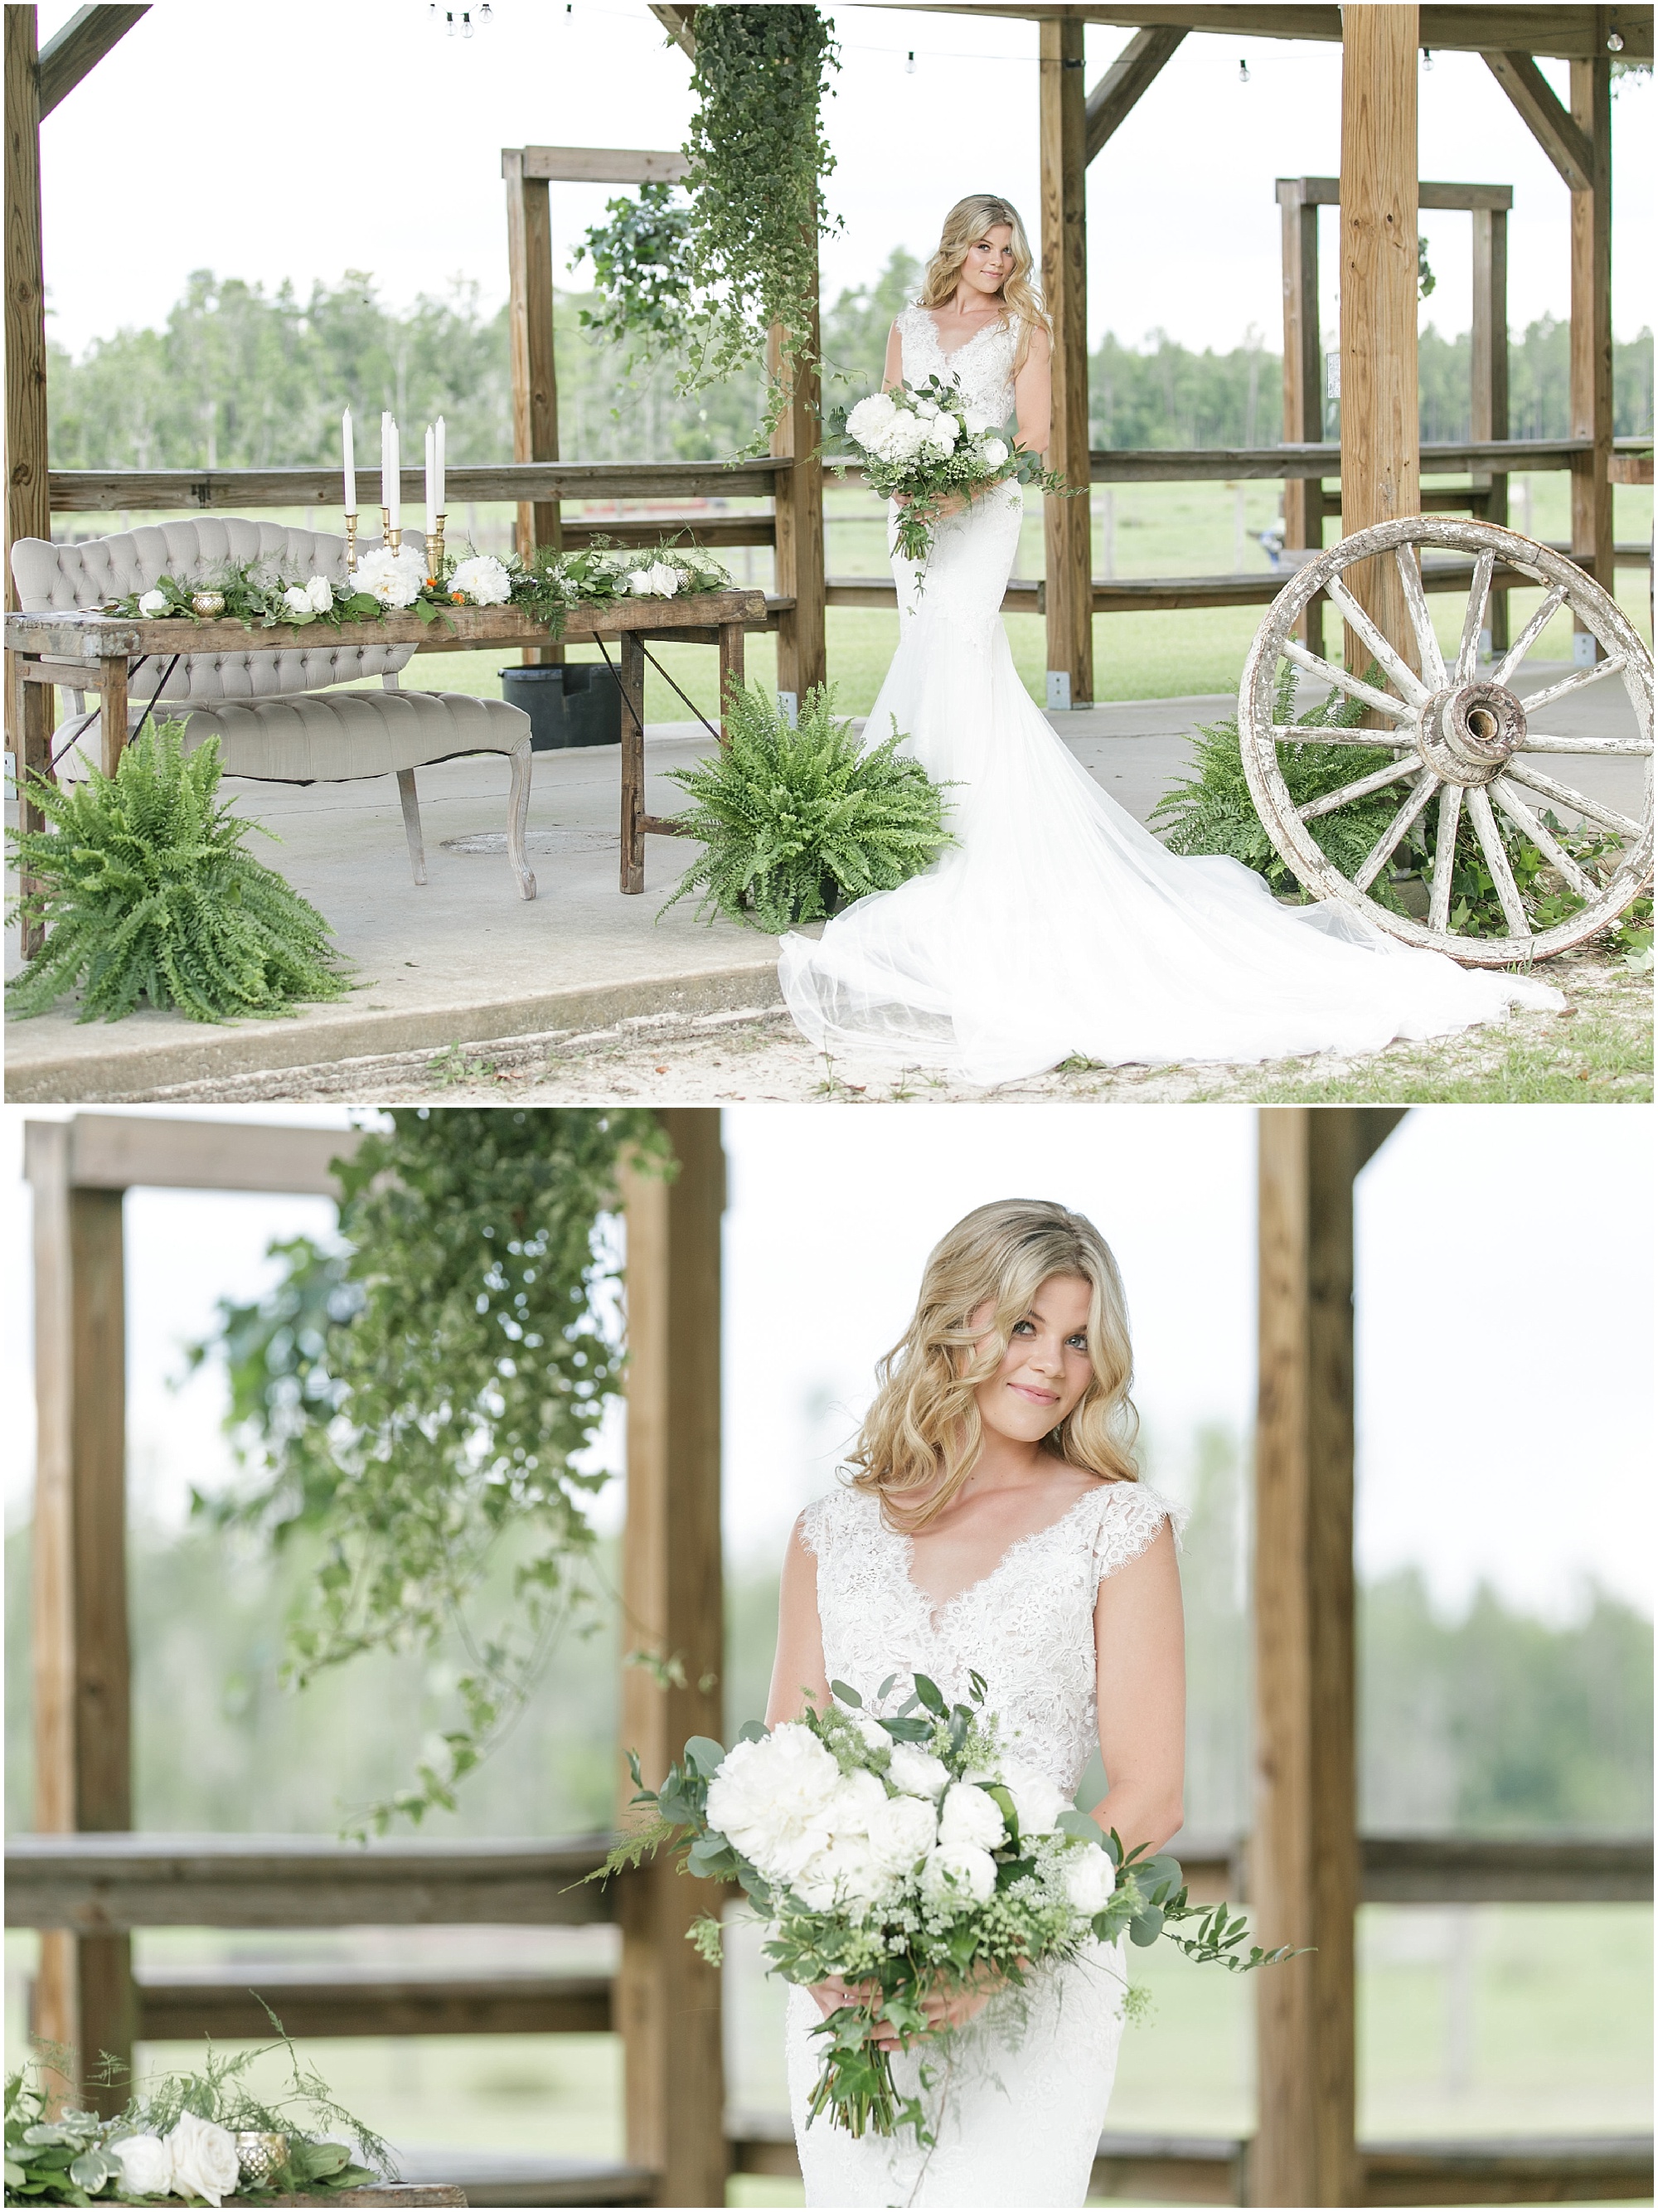 Bride in a white wedding dress holding a green and white bouquet.